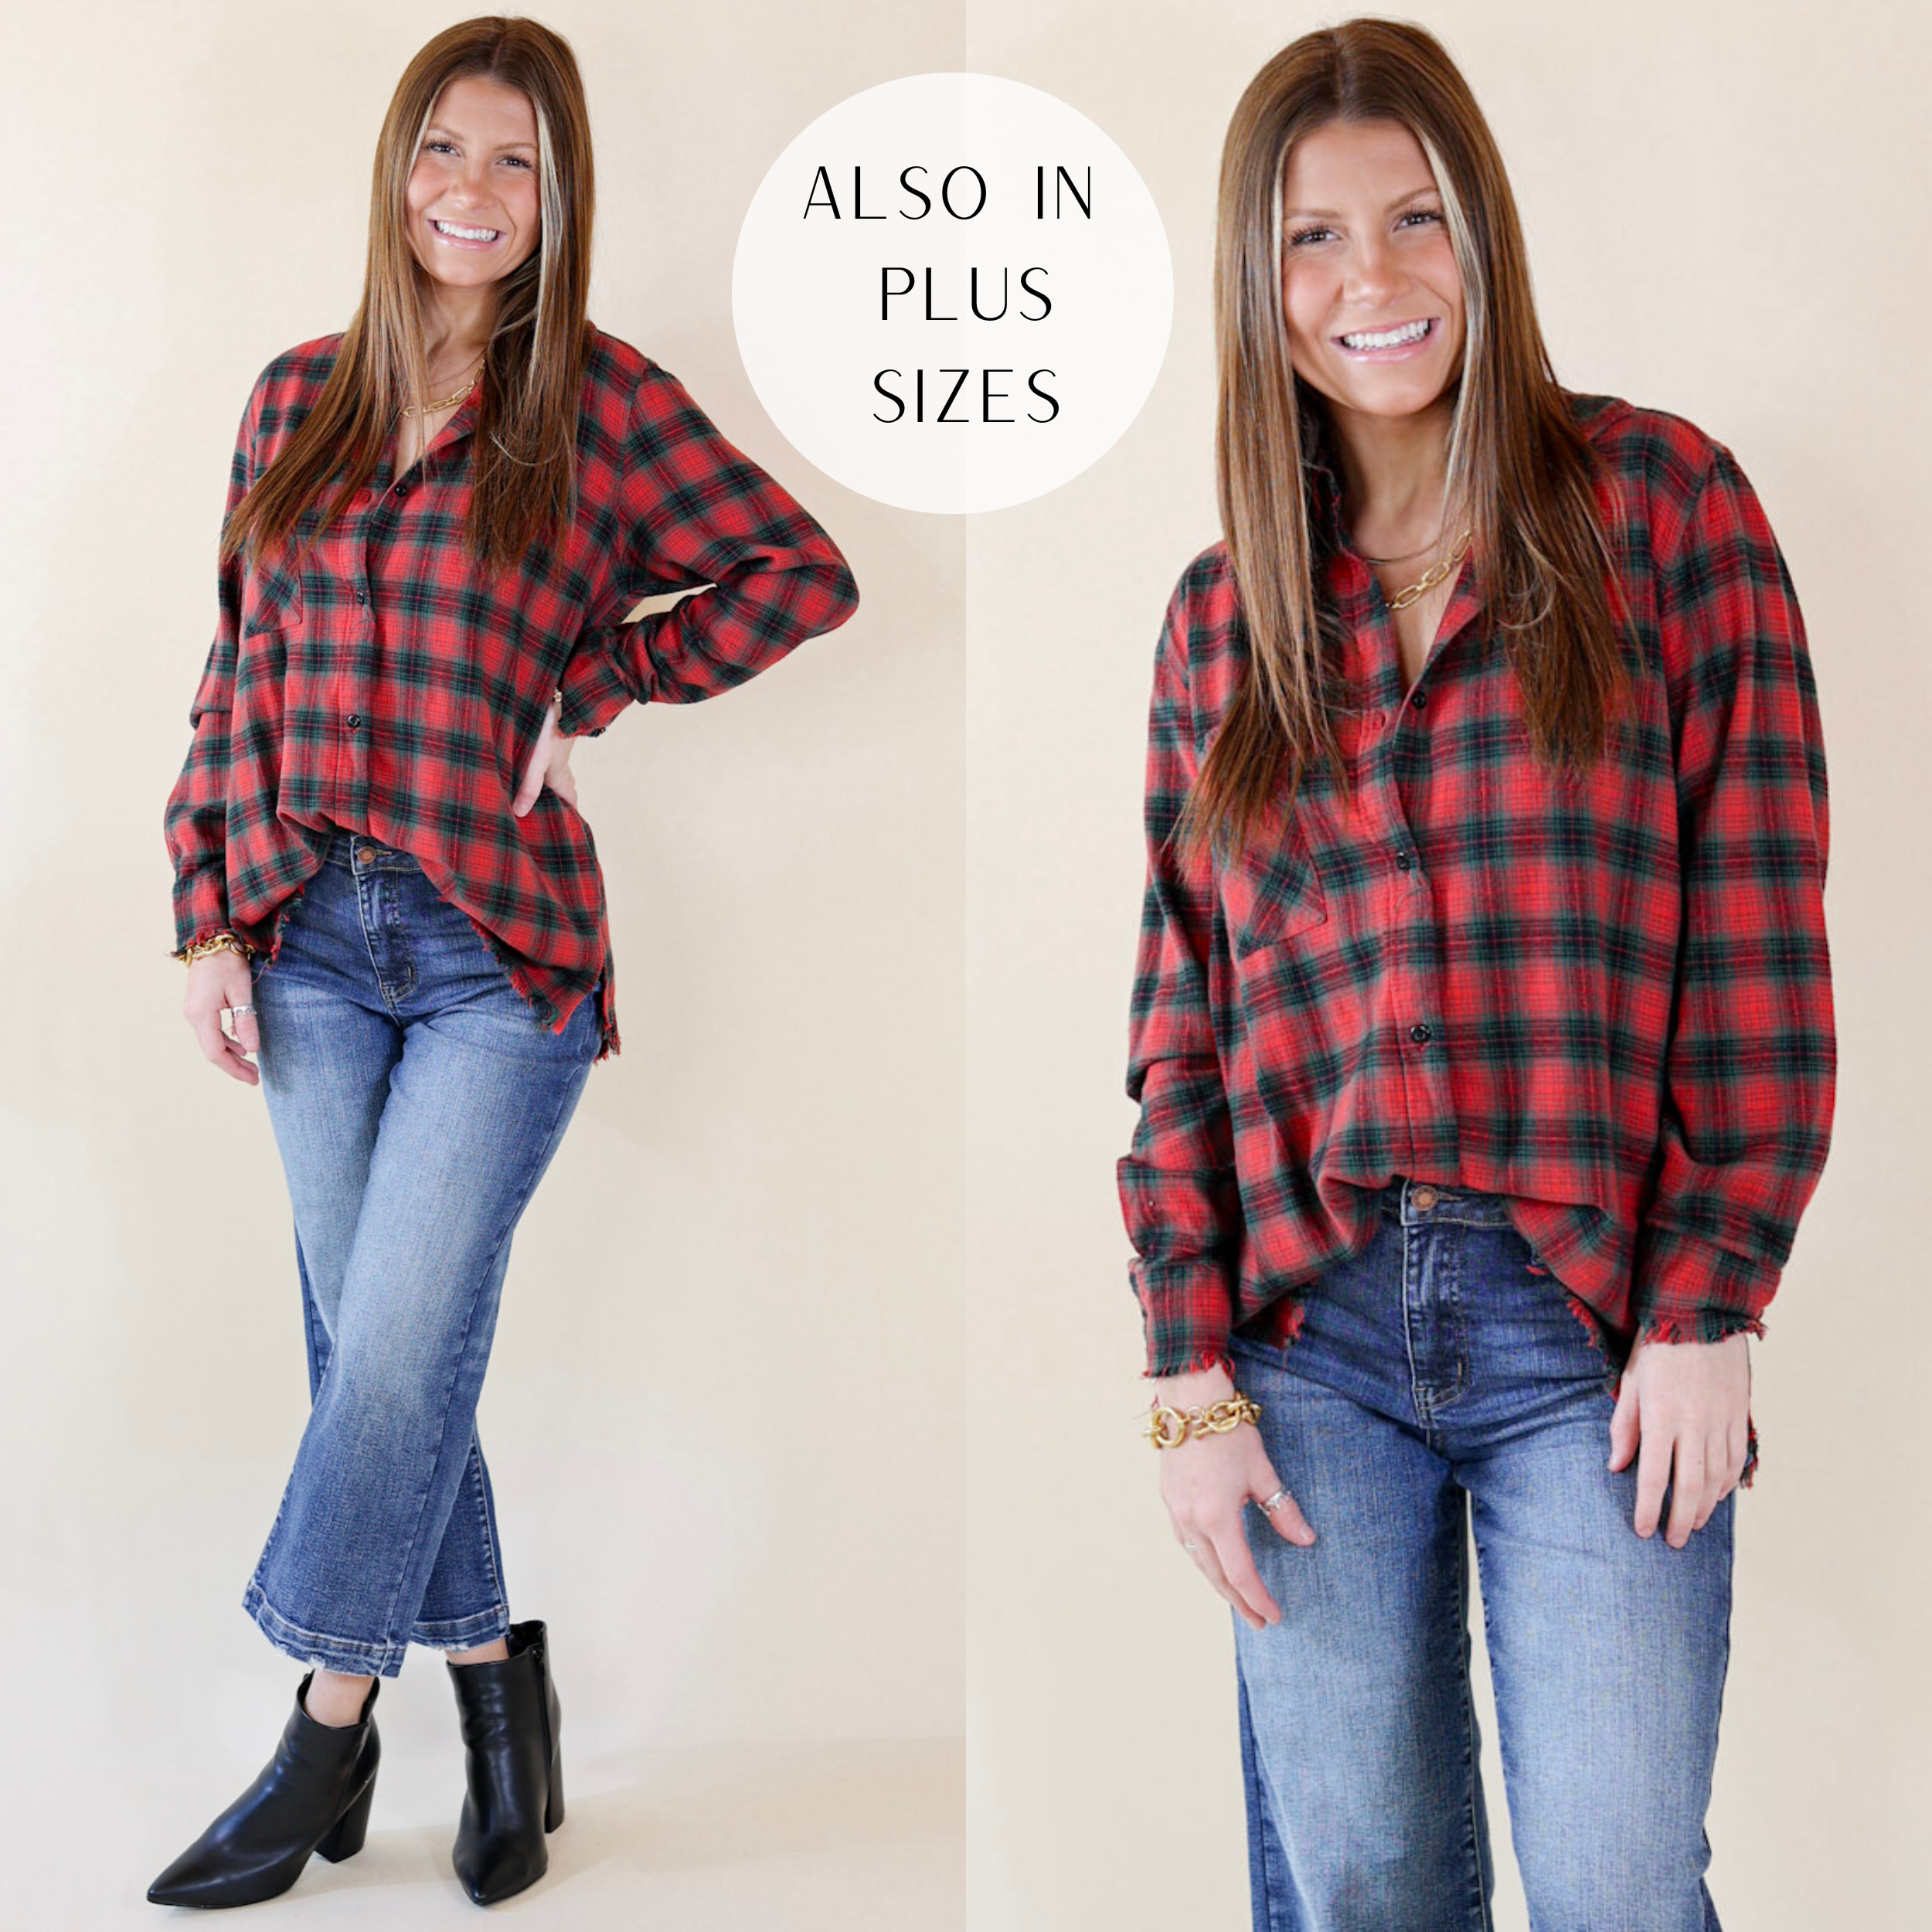 Model is wearing a plaid flannel button up top in red and green. Model has it paired with cropped jeans and black booties.